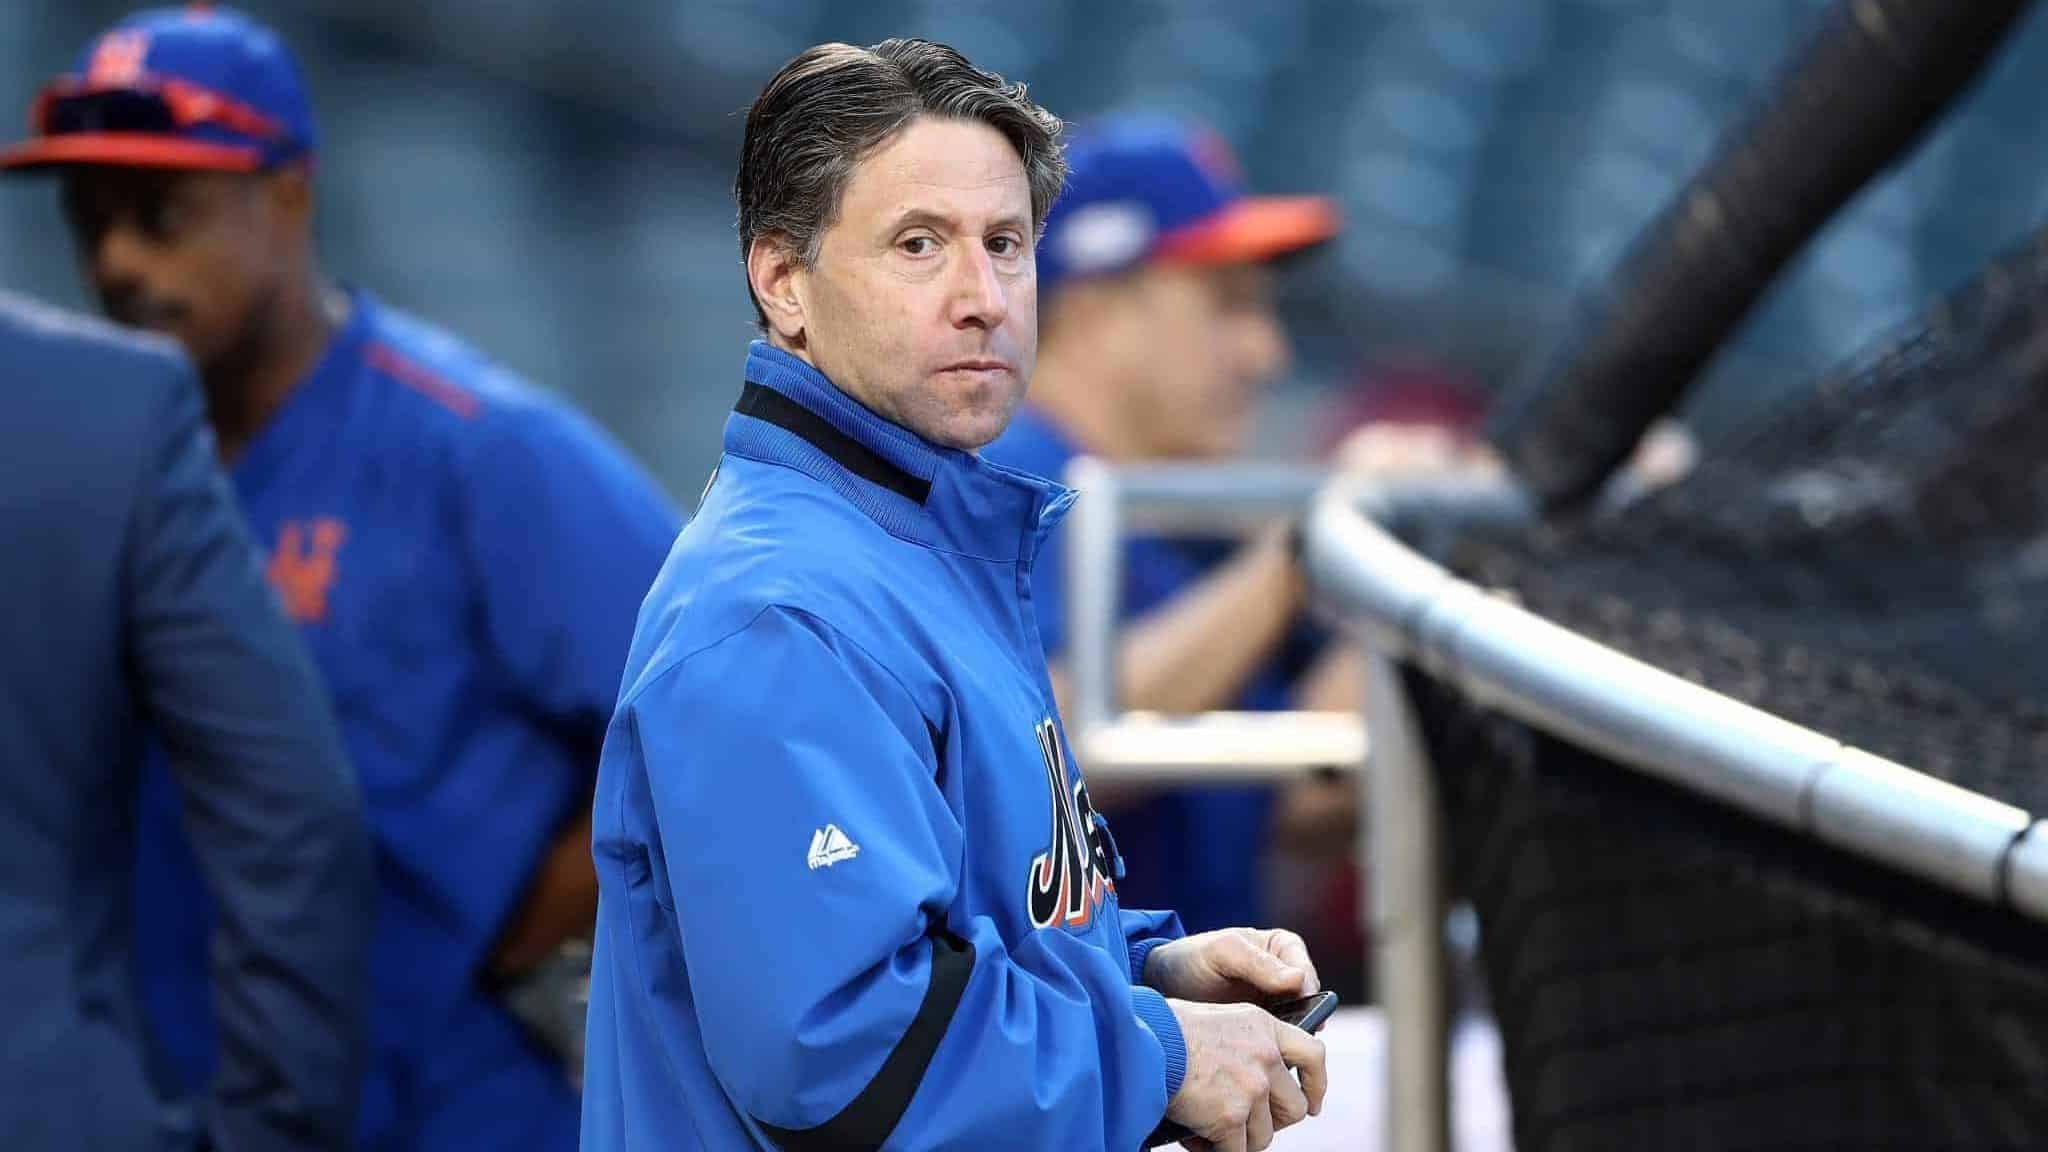 NEW YORK, NY - OCTOBER 05: Jeff Wilpon, COO of the New York Mets, looks on prior to their National League Wild Card game against the San Francisco Giants at Citi Field on October 5, 2016 in New York City.